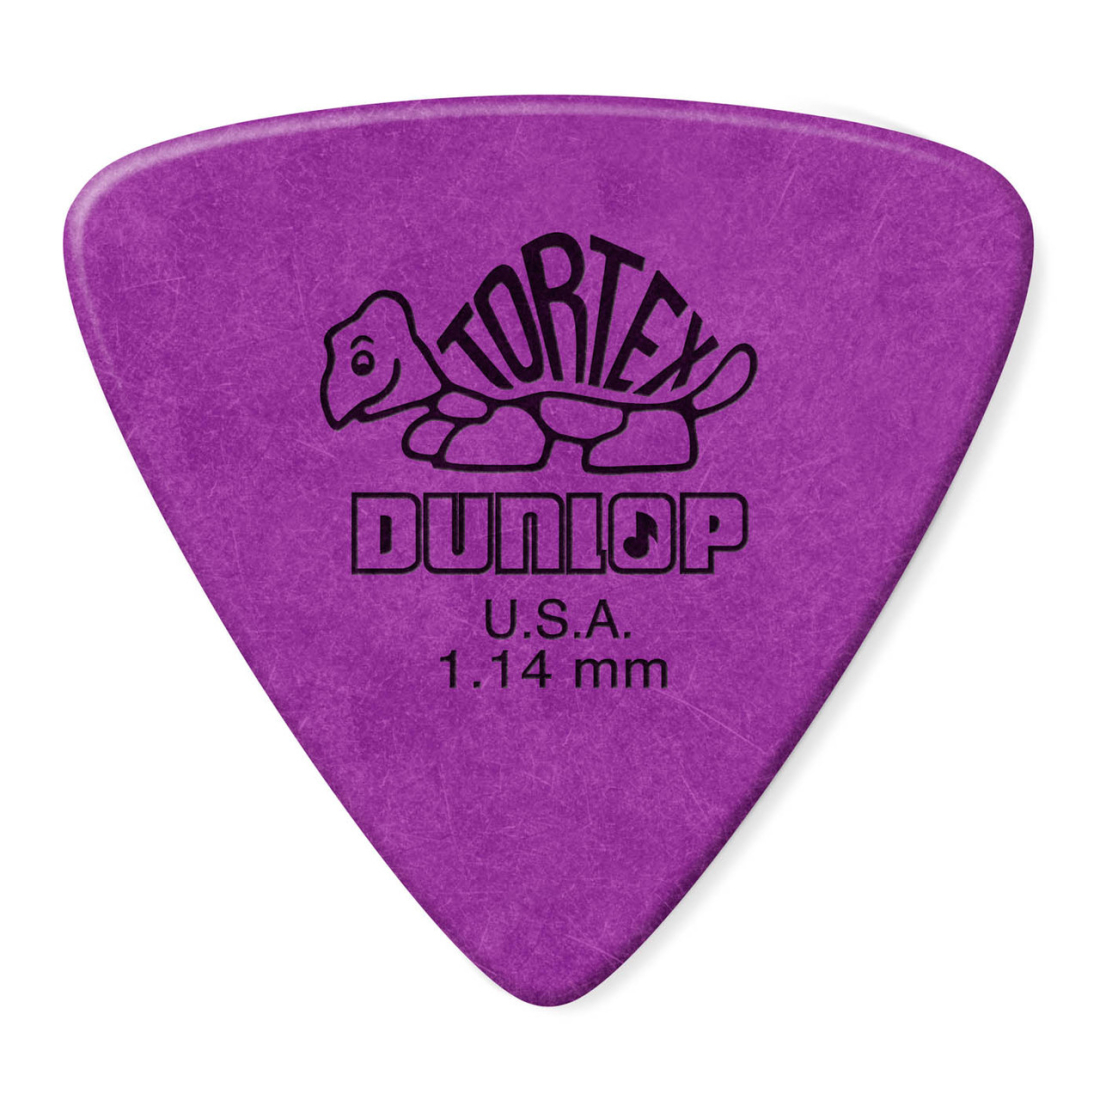 Tortex Triangle Pick Player\'s Pack (6 Pack) - 1.14mm